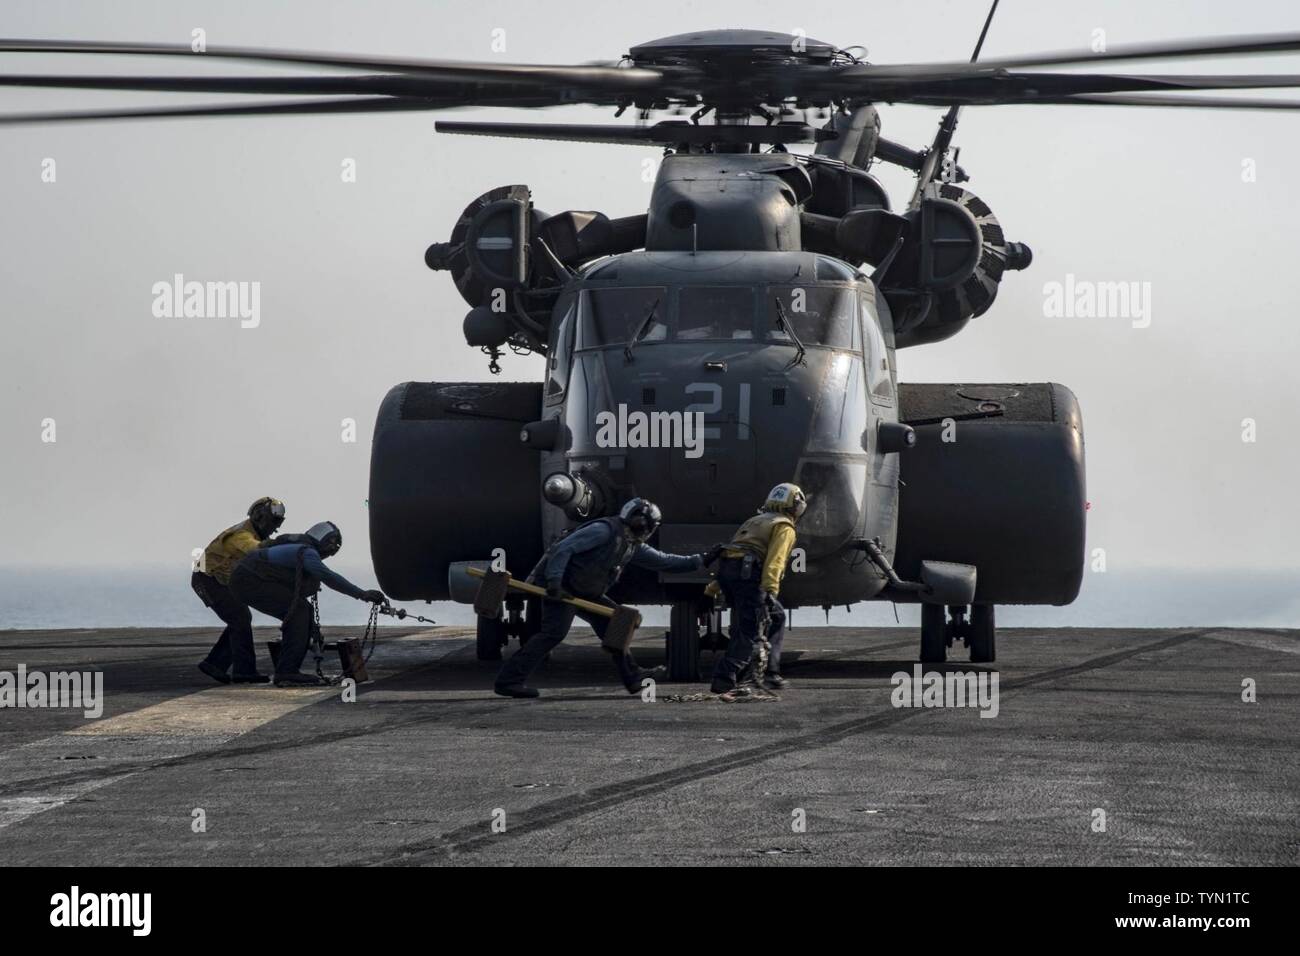 GULF (Nov. 17, 2016) Sailors prepare to chock and chain down an MH-53E Sea Dragon helicopter assigned to the Blackhawks of Helicopter Mine Countermeasures Squadron (HM) 15 to the flight deck of the aircraft carrier USS Dwight D. Eisenhower (CVN 69) (Ike). Ike and its carrier strike group are deployed in support of Operation Inherent Resolve, maritime security operations and theater security cooperation efforts in the U.S. 5th Fleet area of operations. Stock Photo